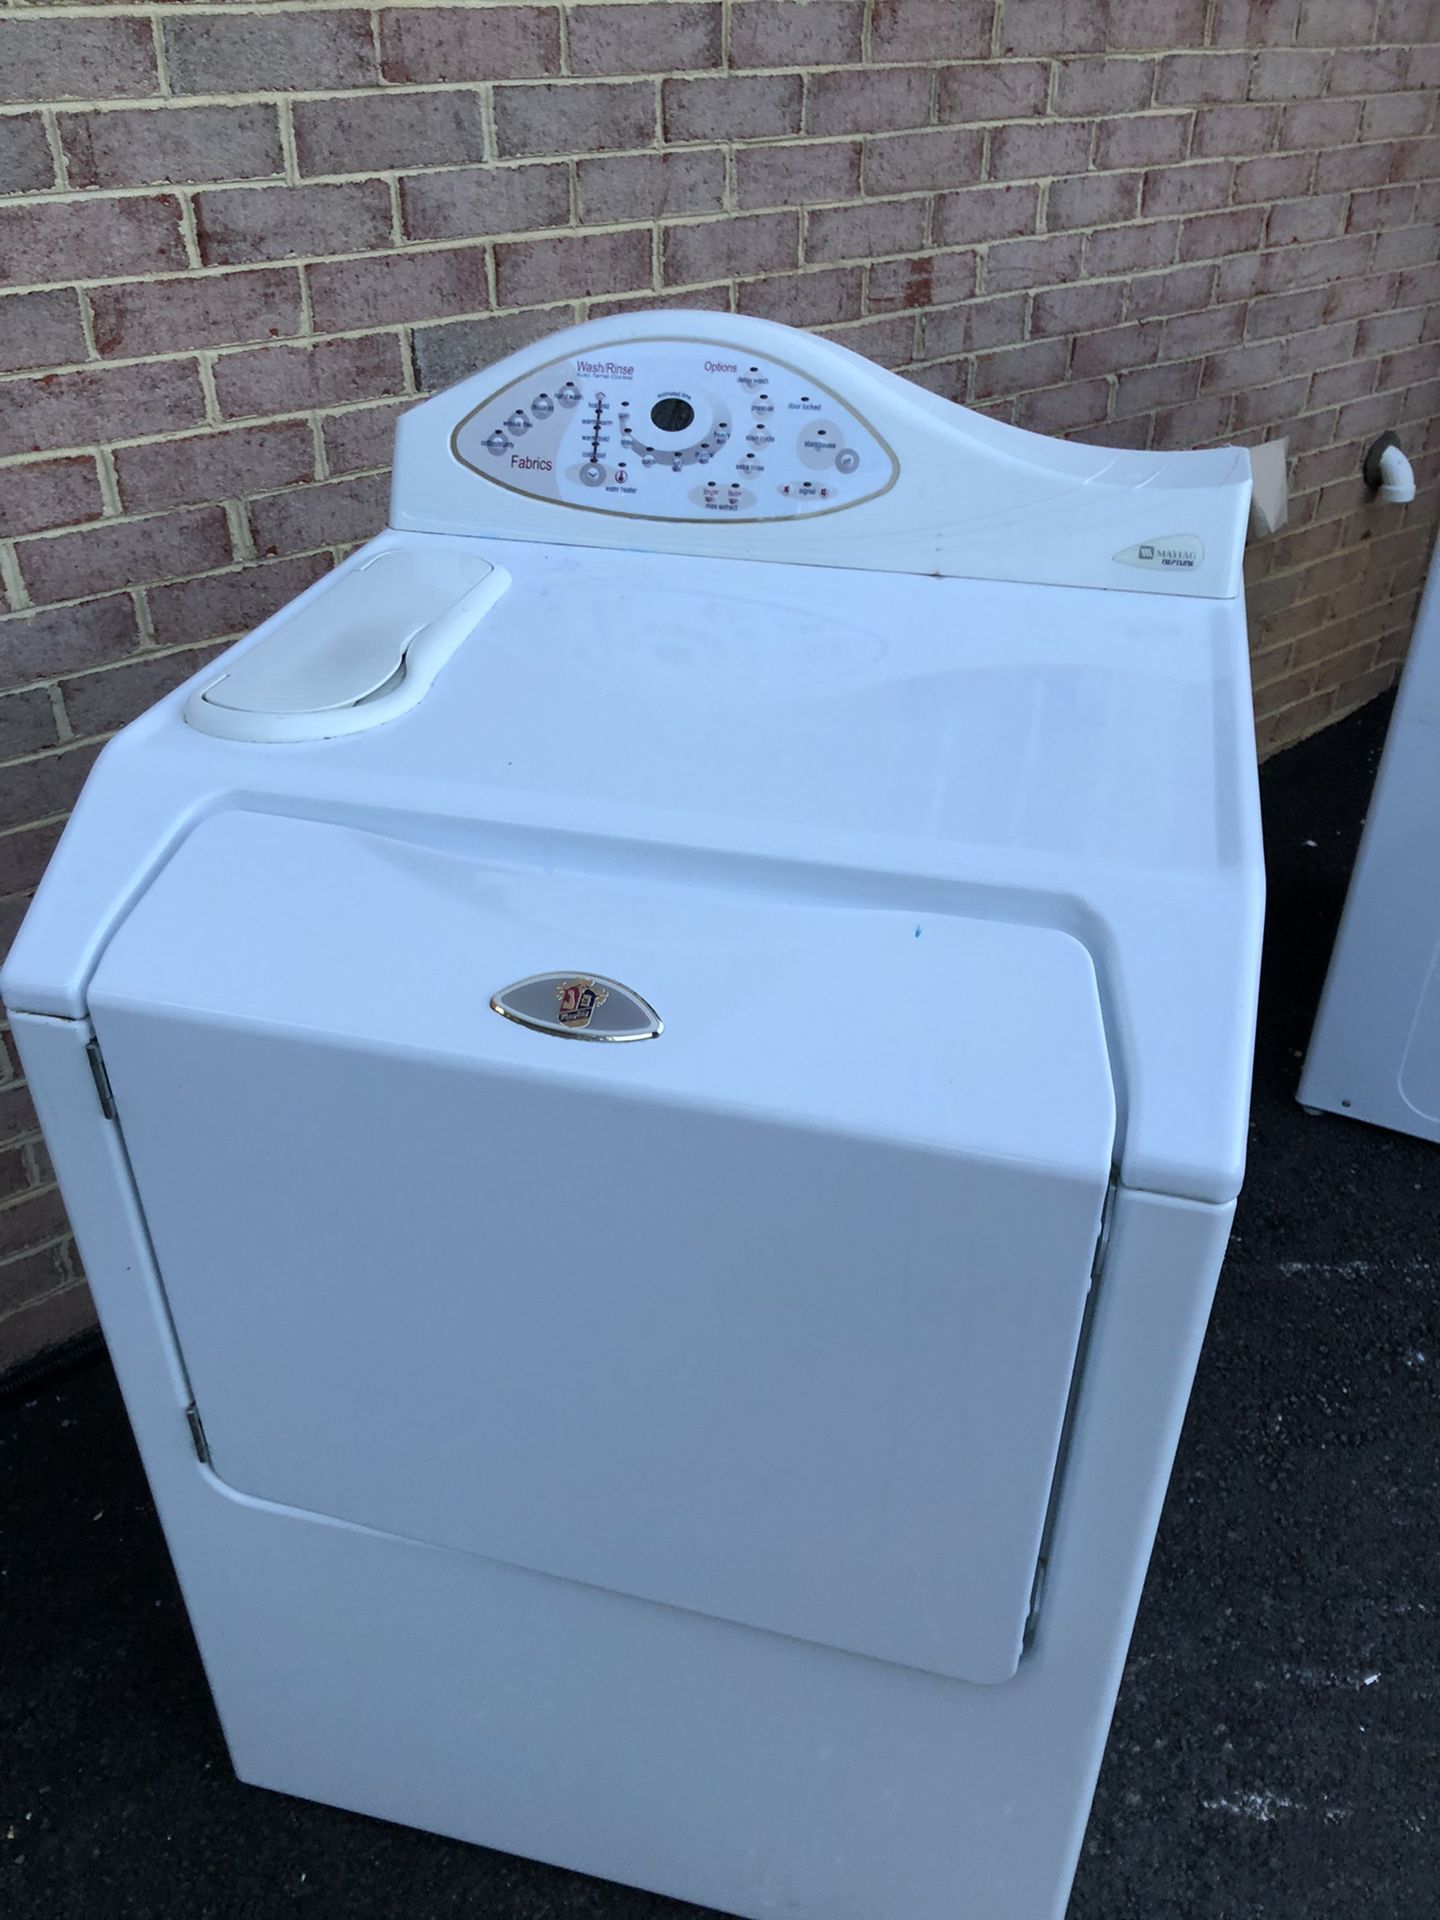 Free Neptune washer and dryer